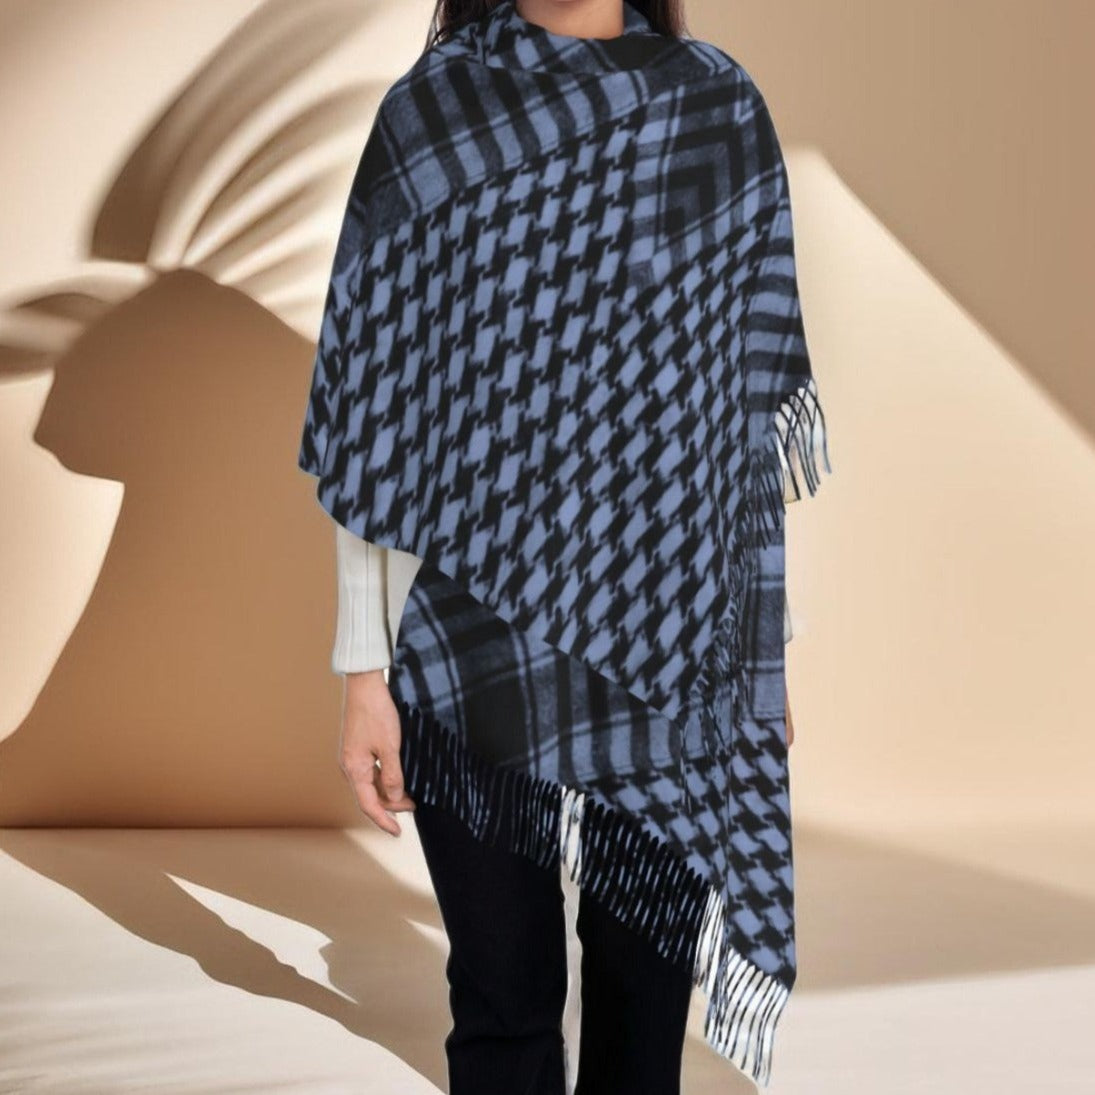 Traditional Palestinian keffiyeh scarf - Try Modest Limited 